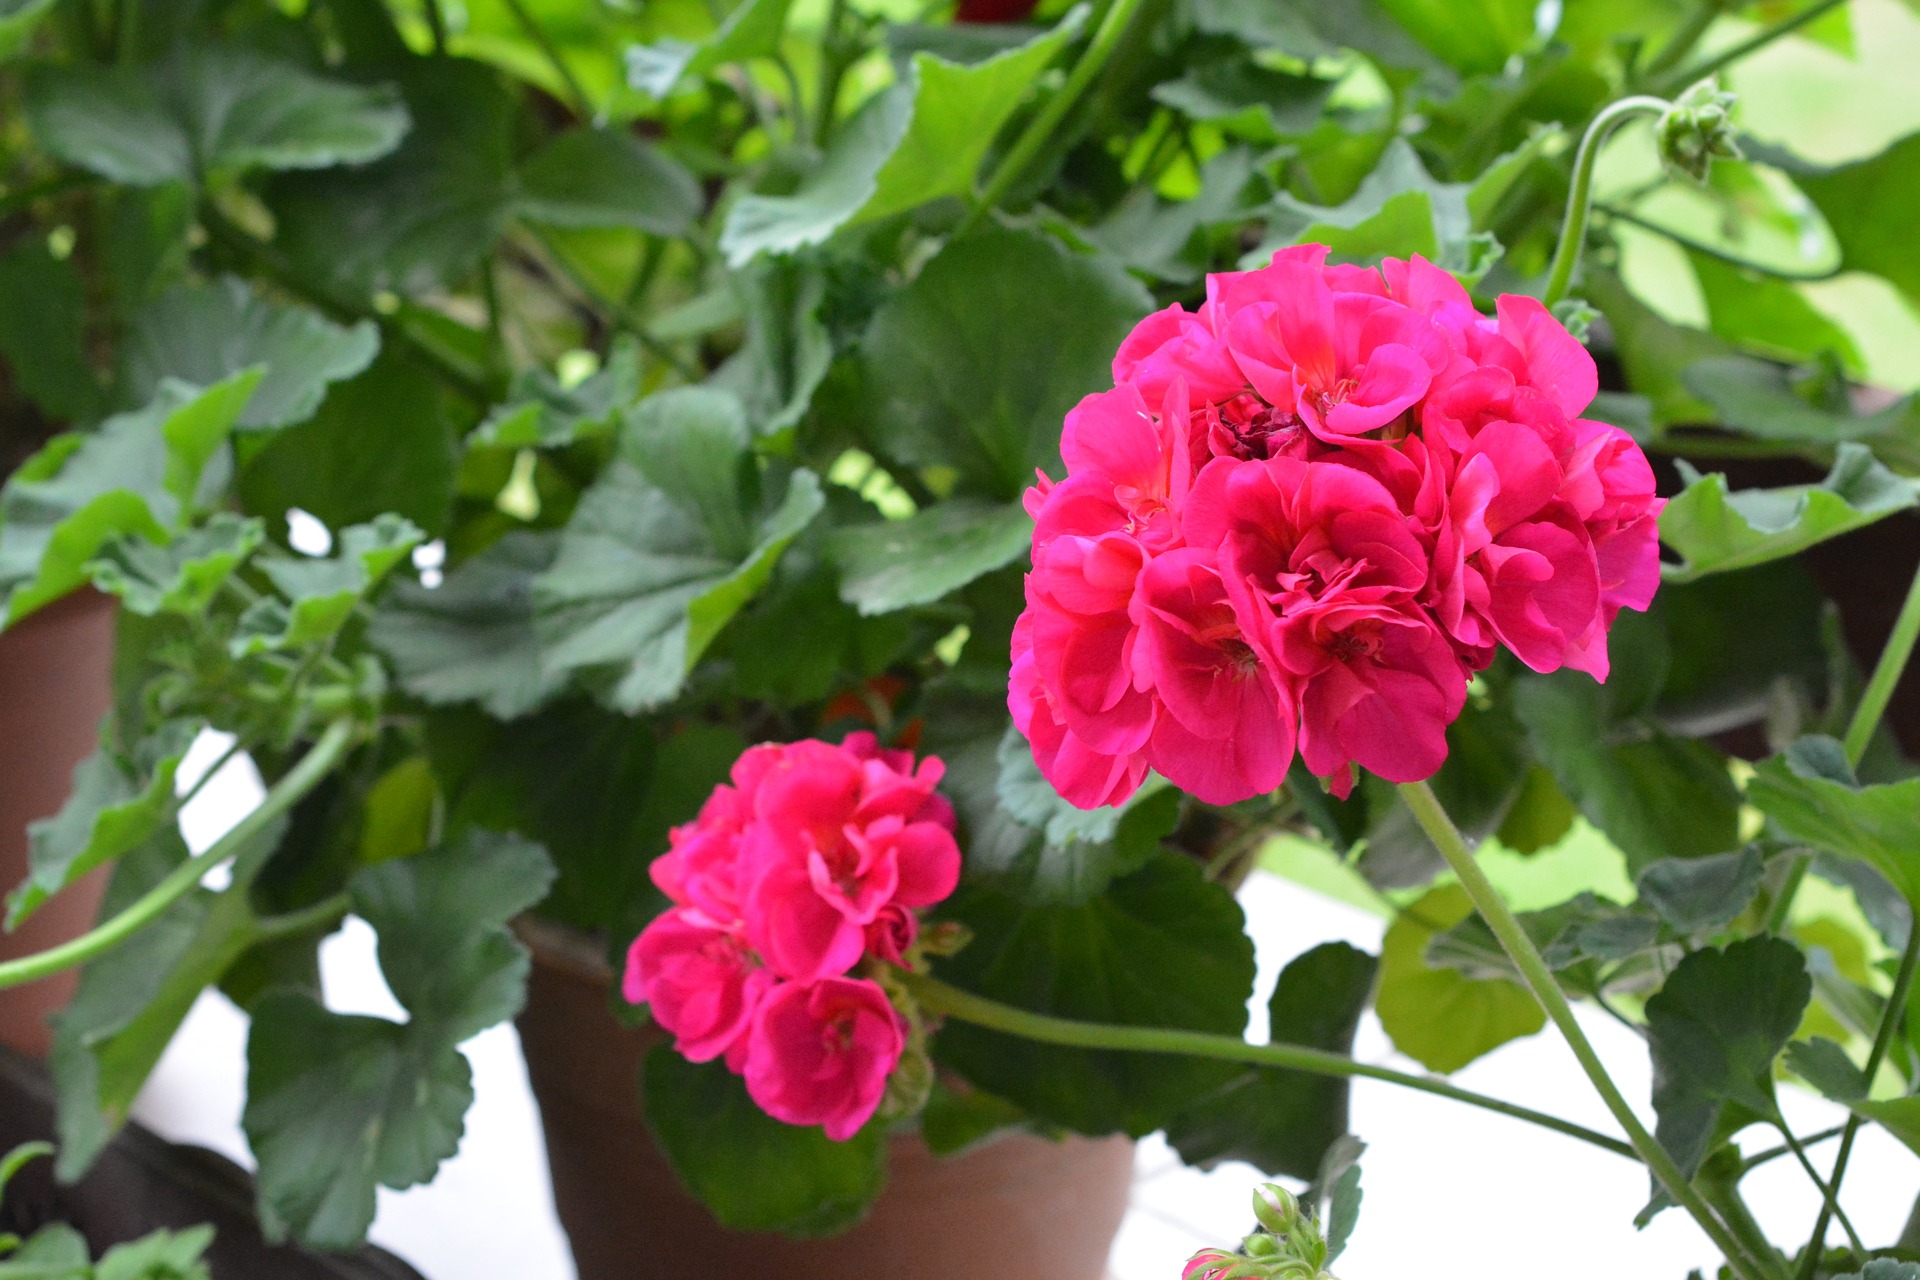 Geraniums: How to Plant, Grow, and Care for Geraniums | The Old ...